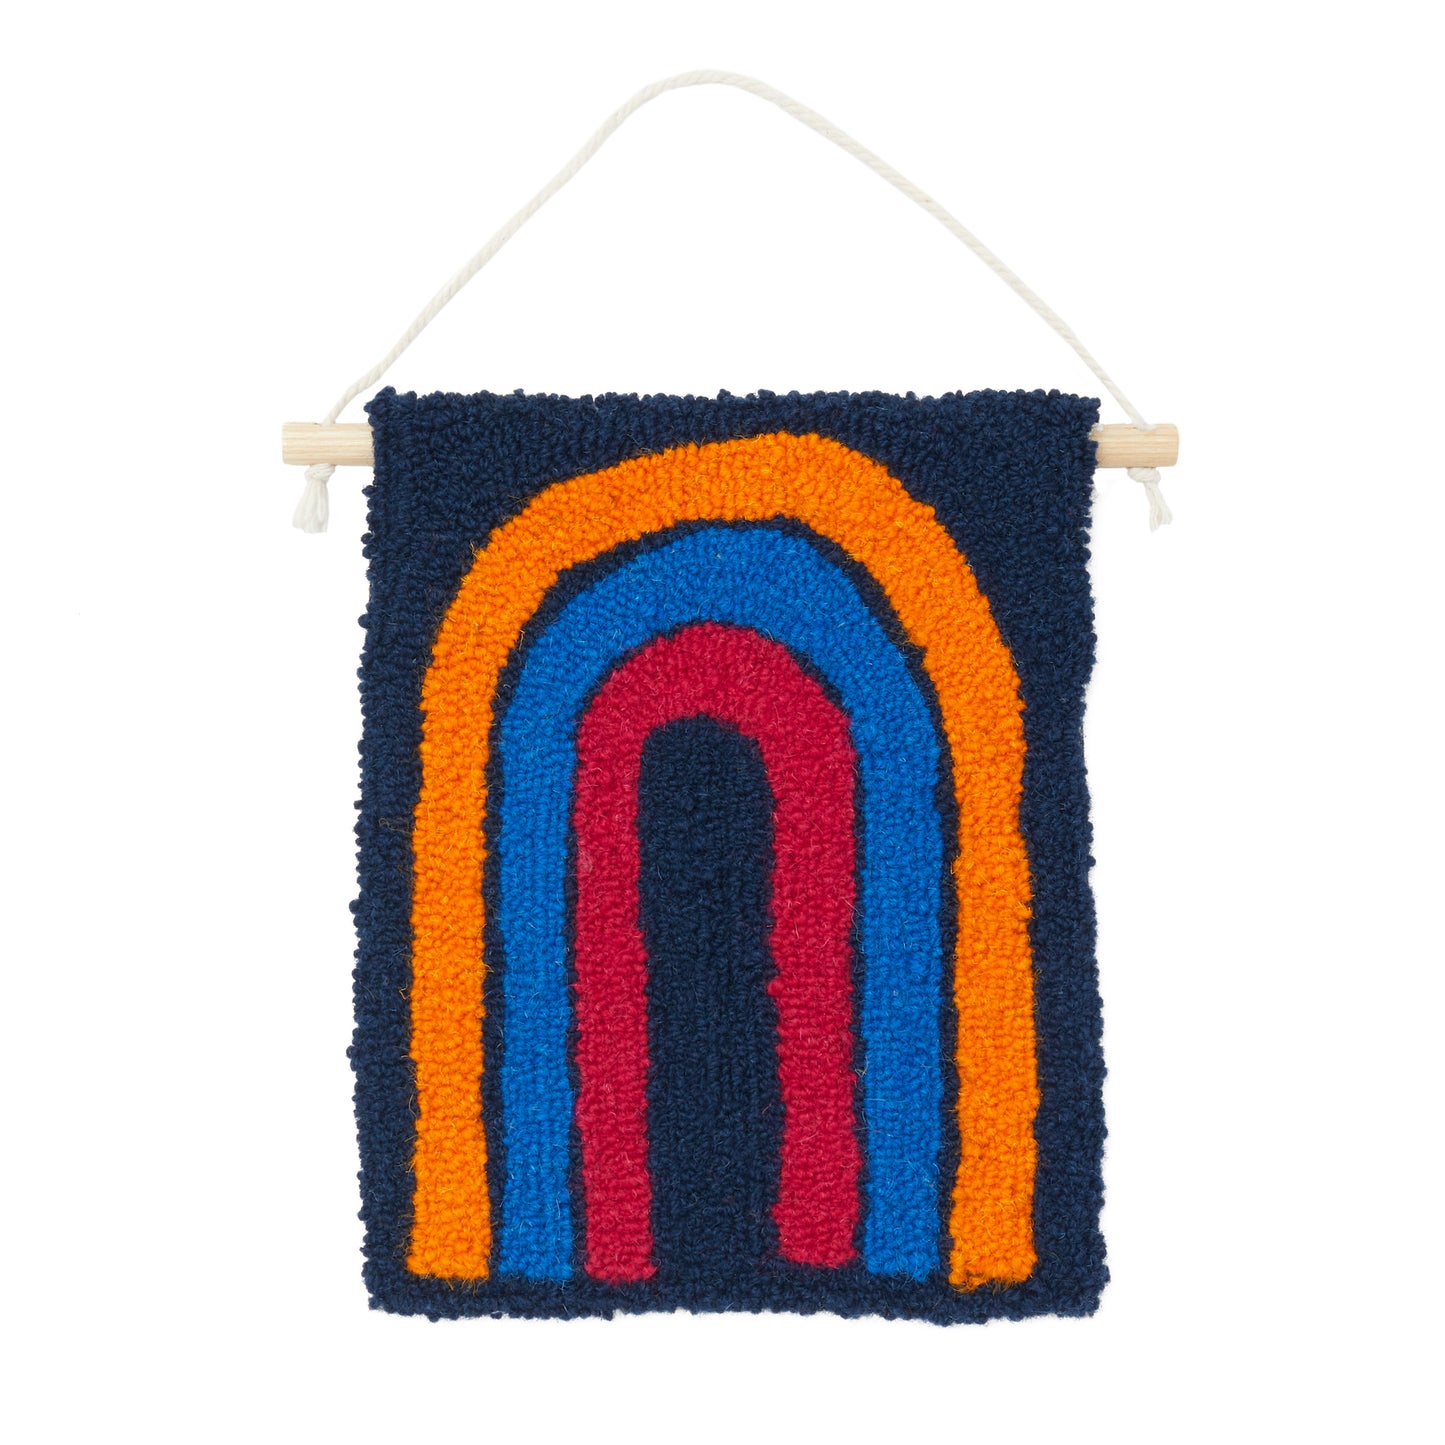 A loop pile tufted wall hanging in navy, orange, royal blue and magenta. This rainbow design has playful ‘illustrated’ edges.